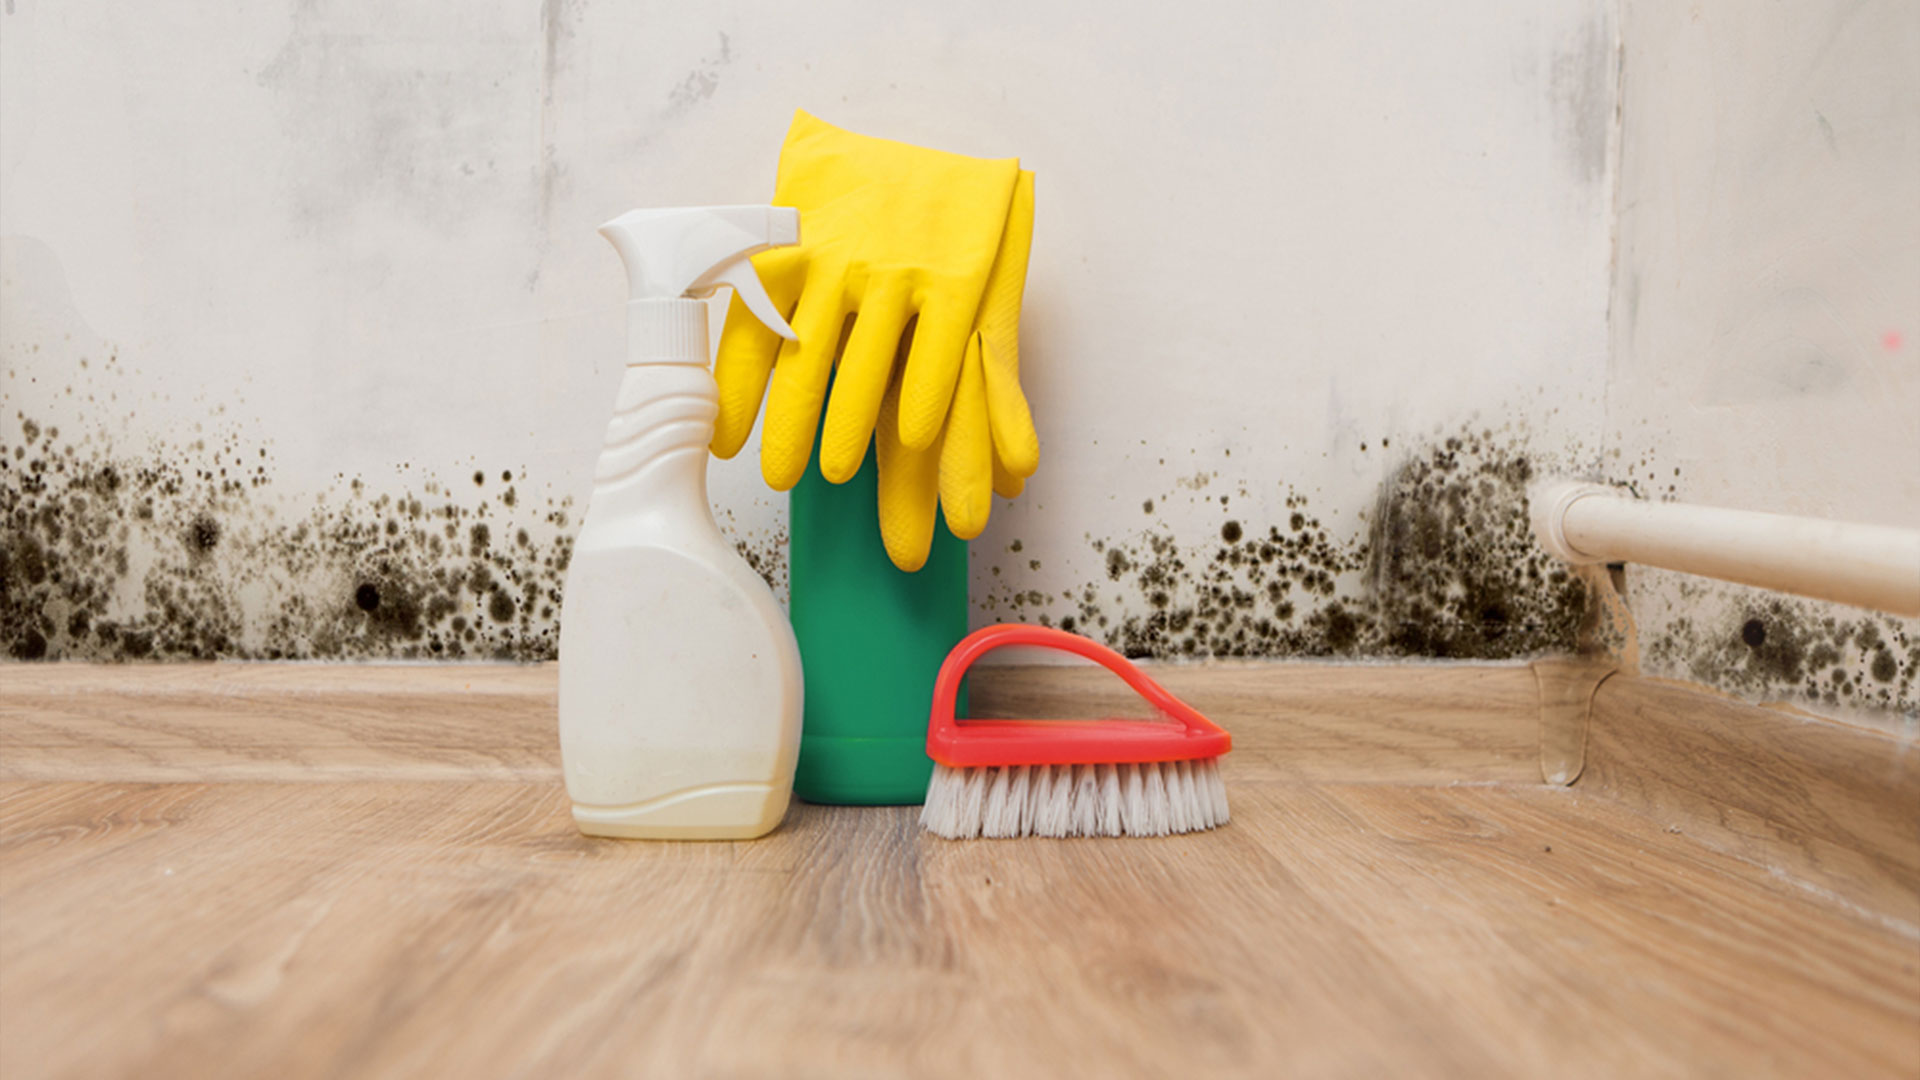 mold cleaning chemicals